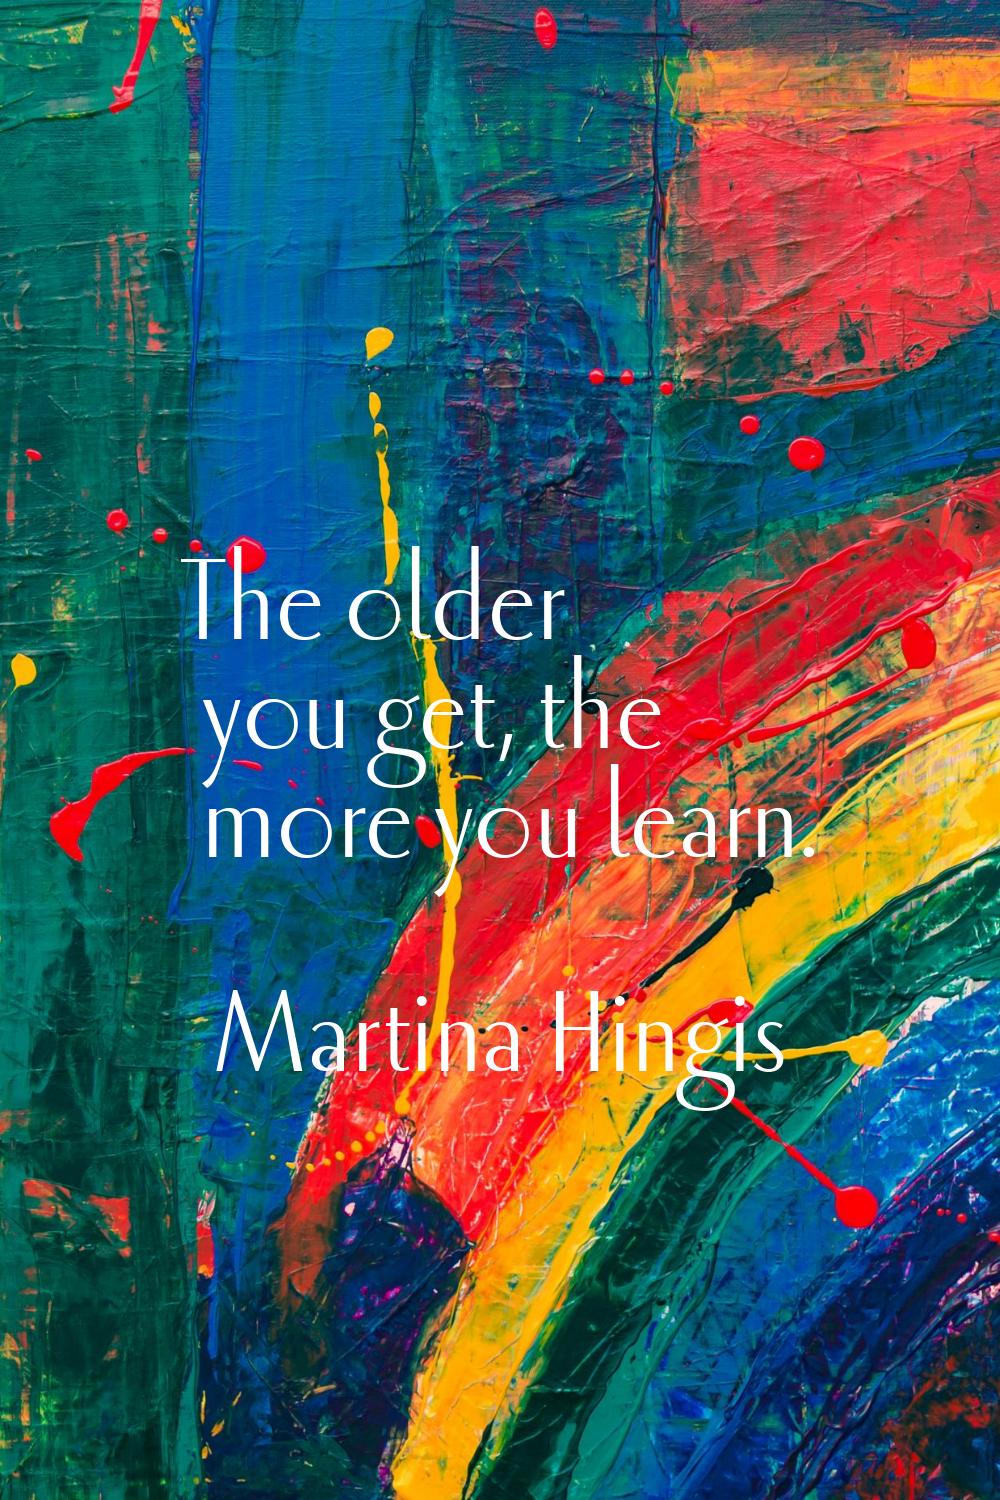 The older you get, the more you learn.